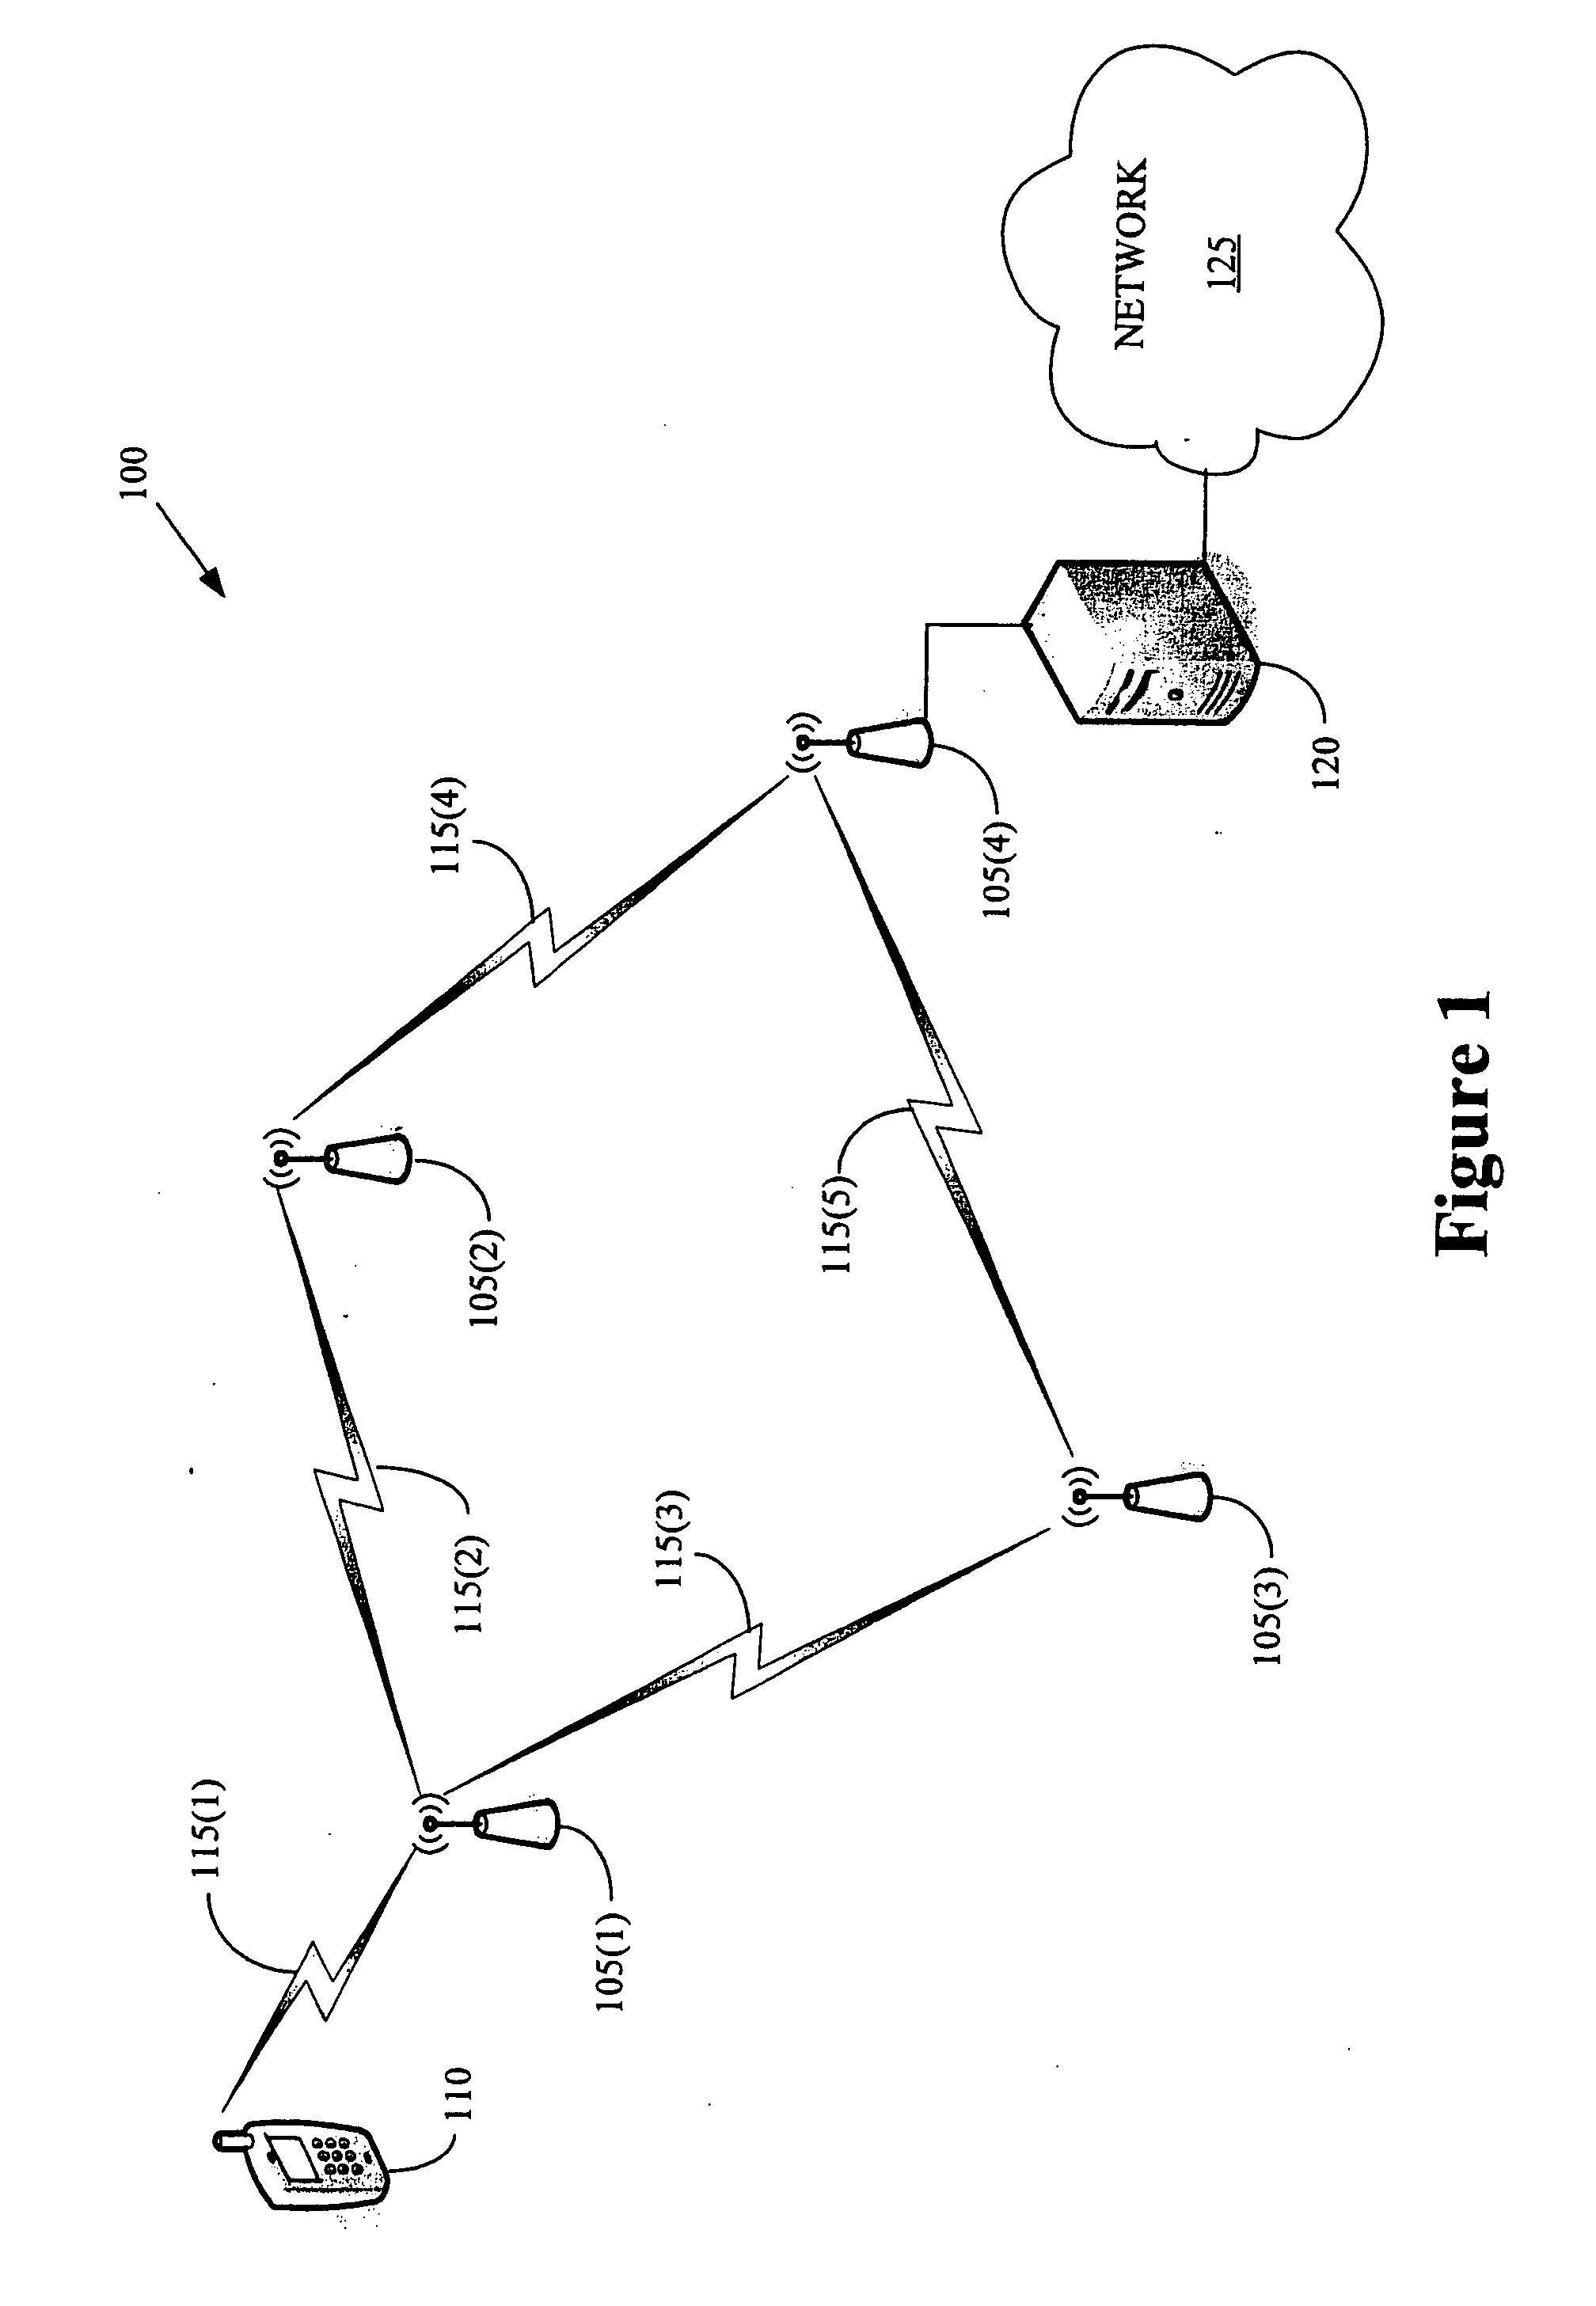 Method of routing and resource allocation in a wireless communication system